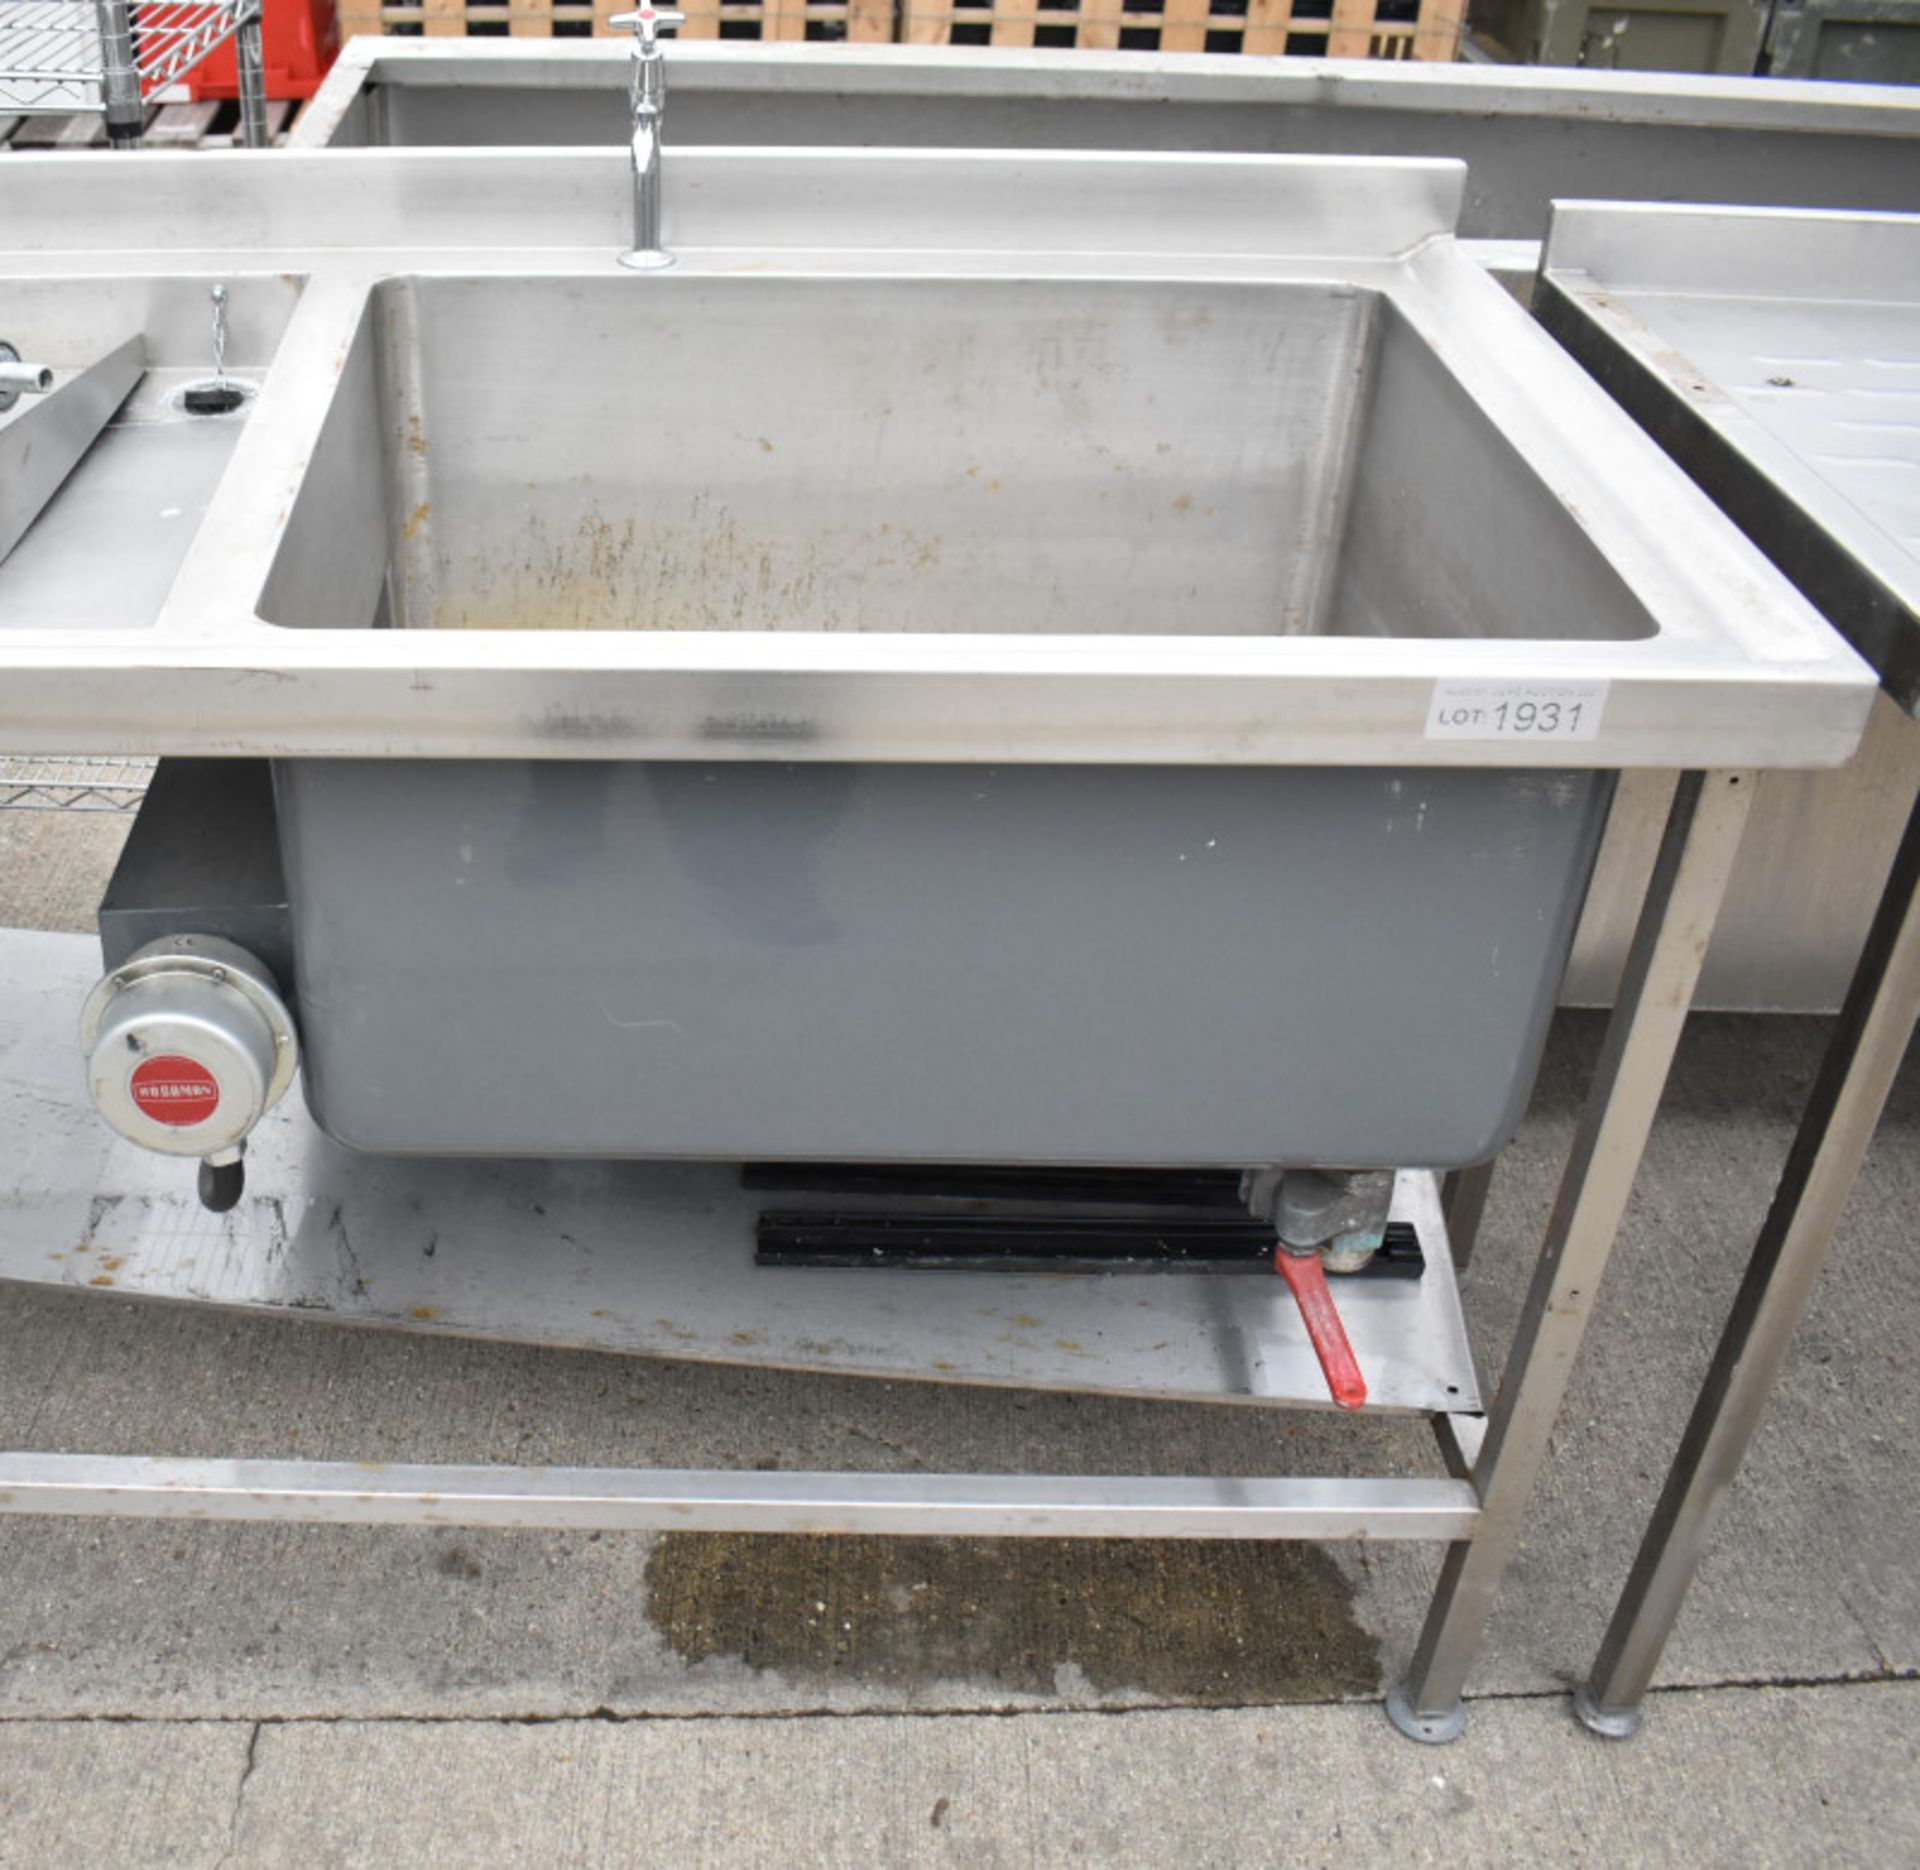 Stainless steel Double drainer Prep Sink Unit L 2700mm x D 750mm x H 950mm - Image 2 of 5